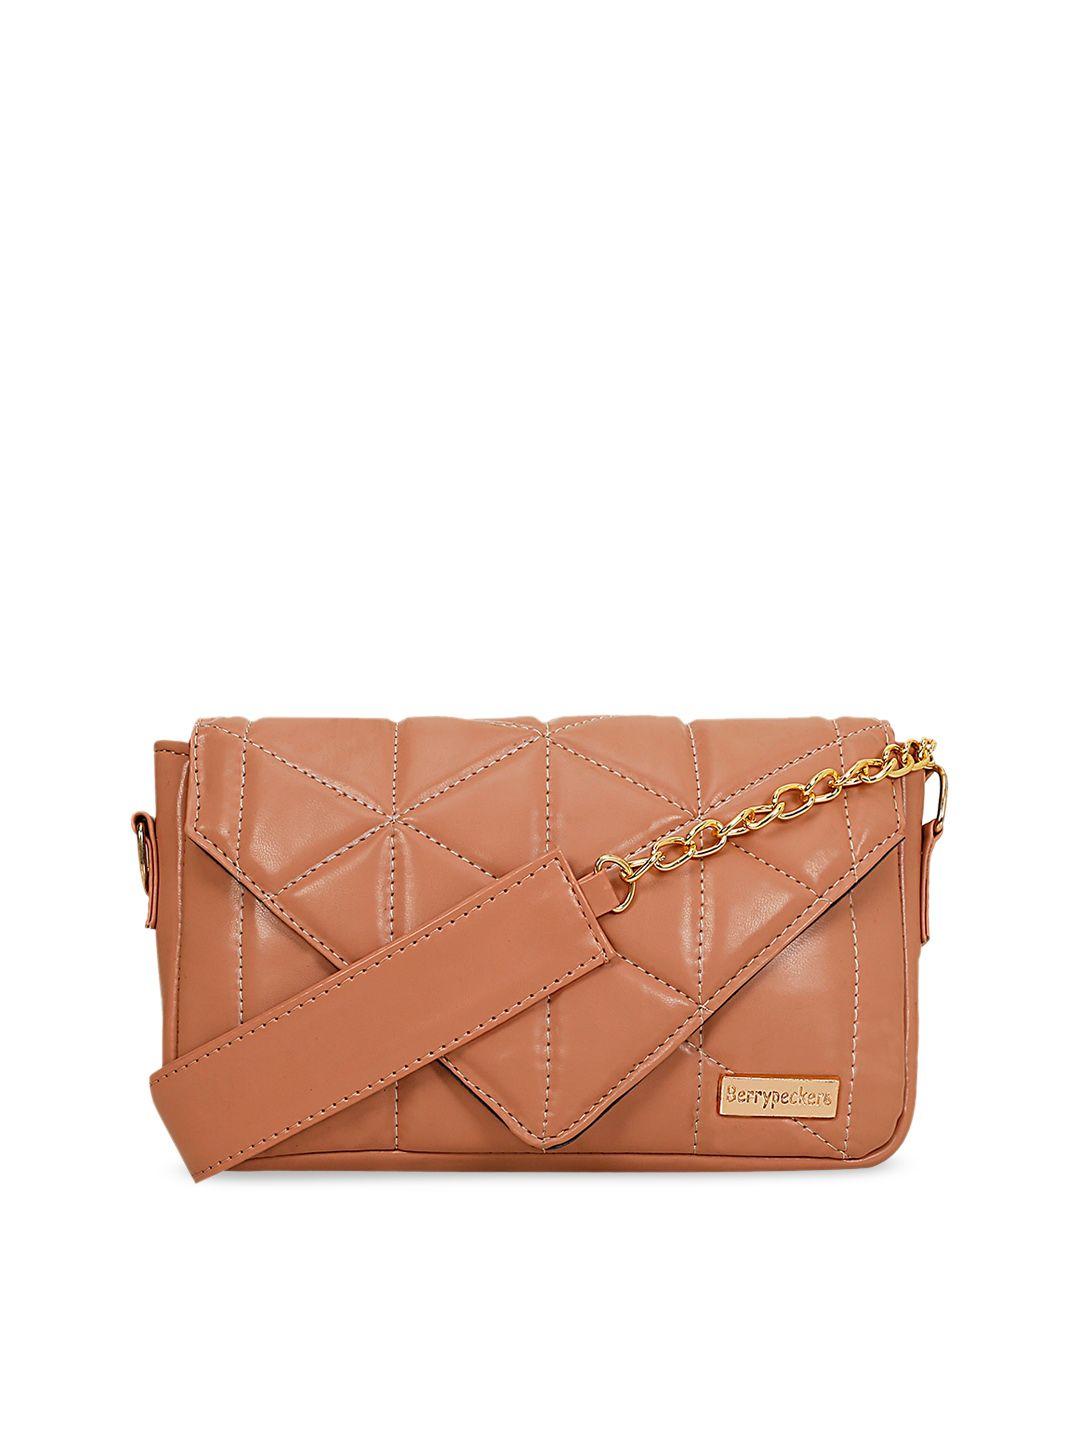 berrypeckers peach-coloured embellished structured sling bag with quilted